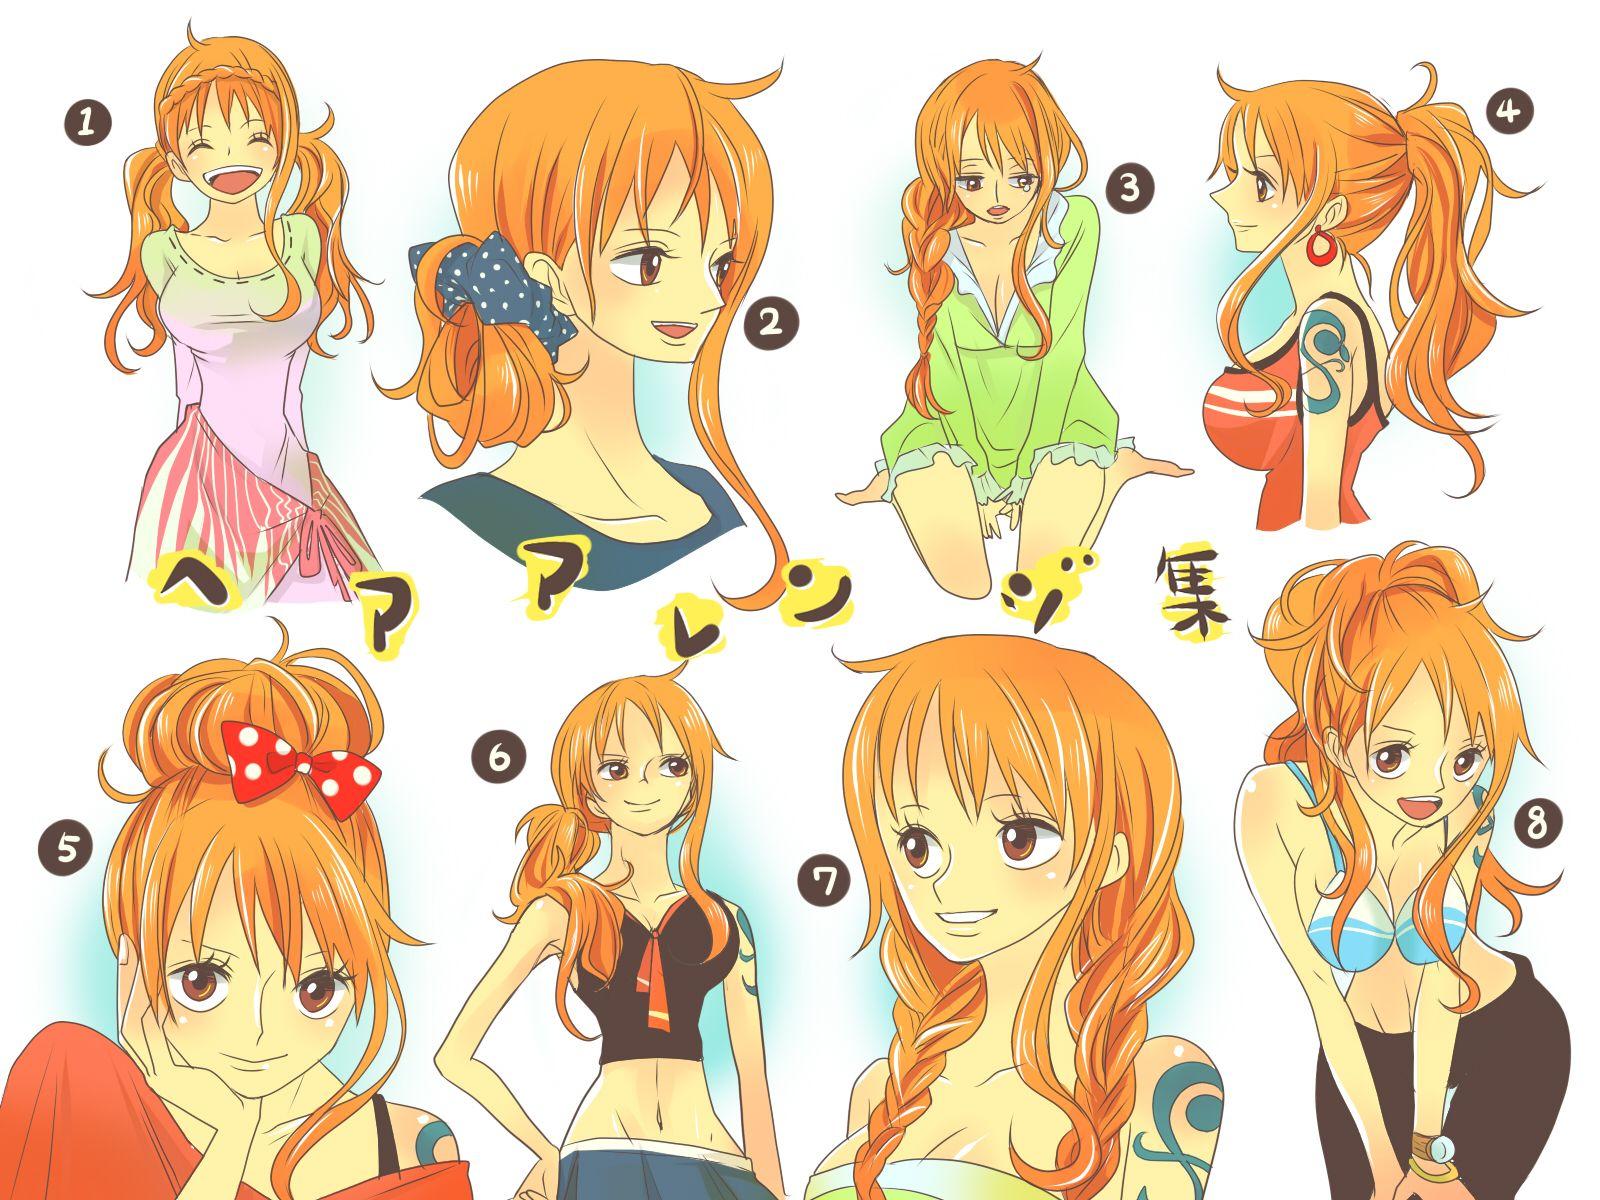 Nami The Eight Faces of One Piece Nami Wallpaper For Android. Nami